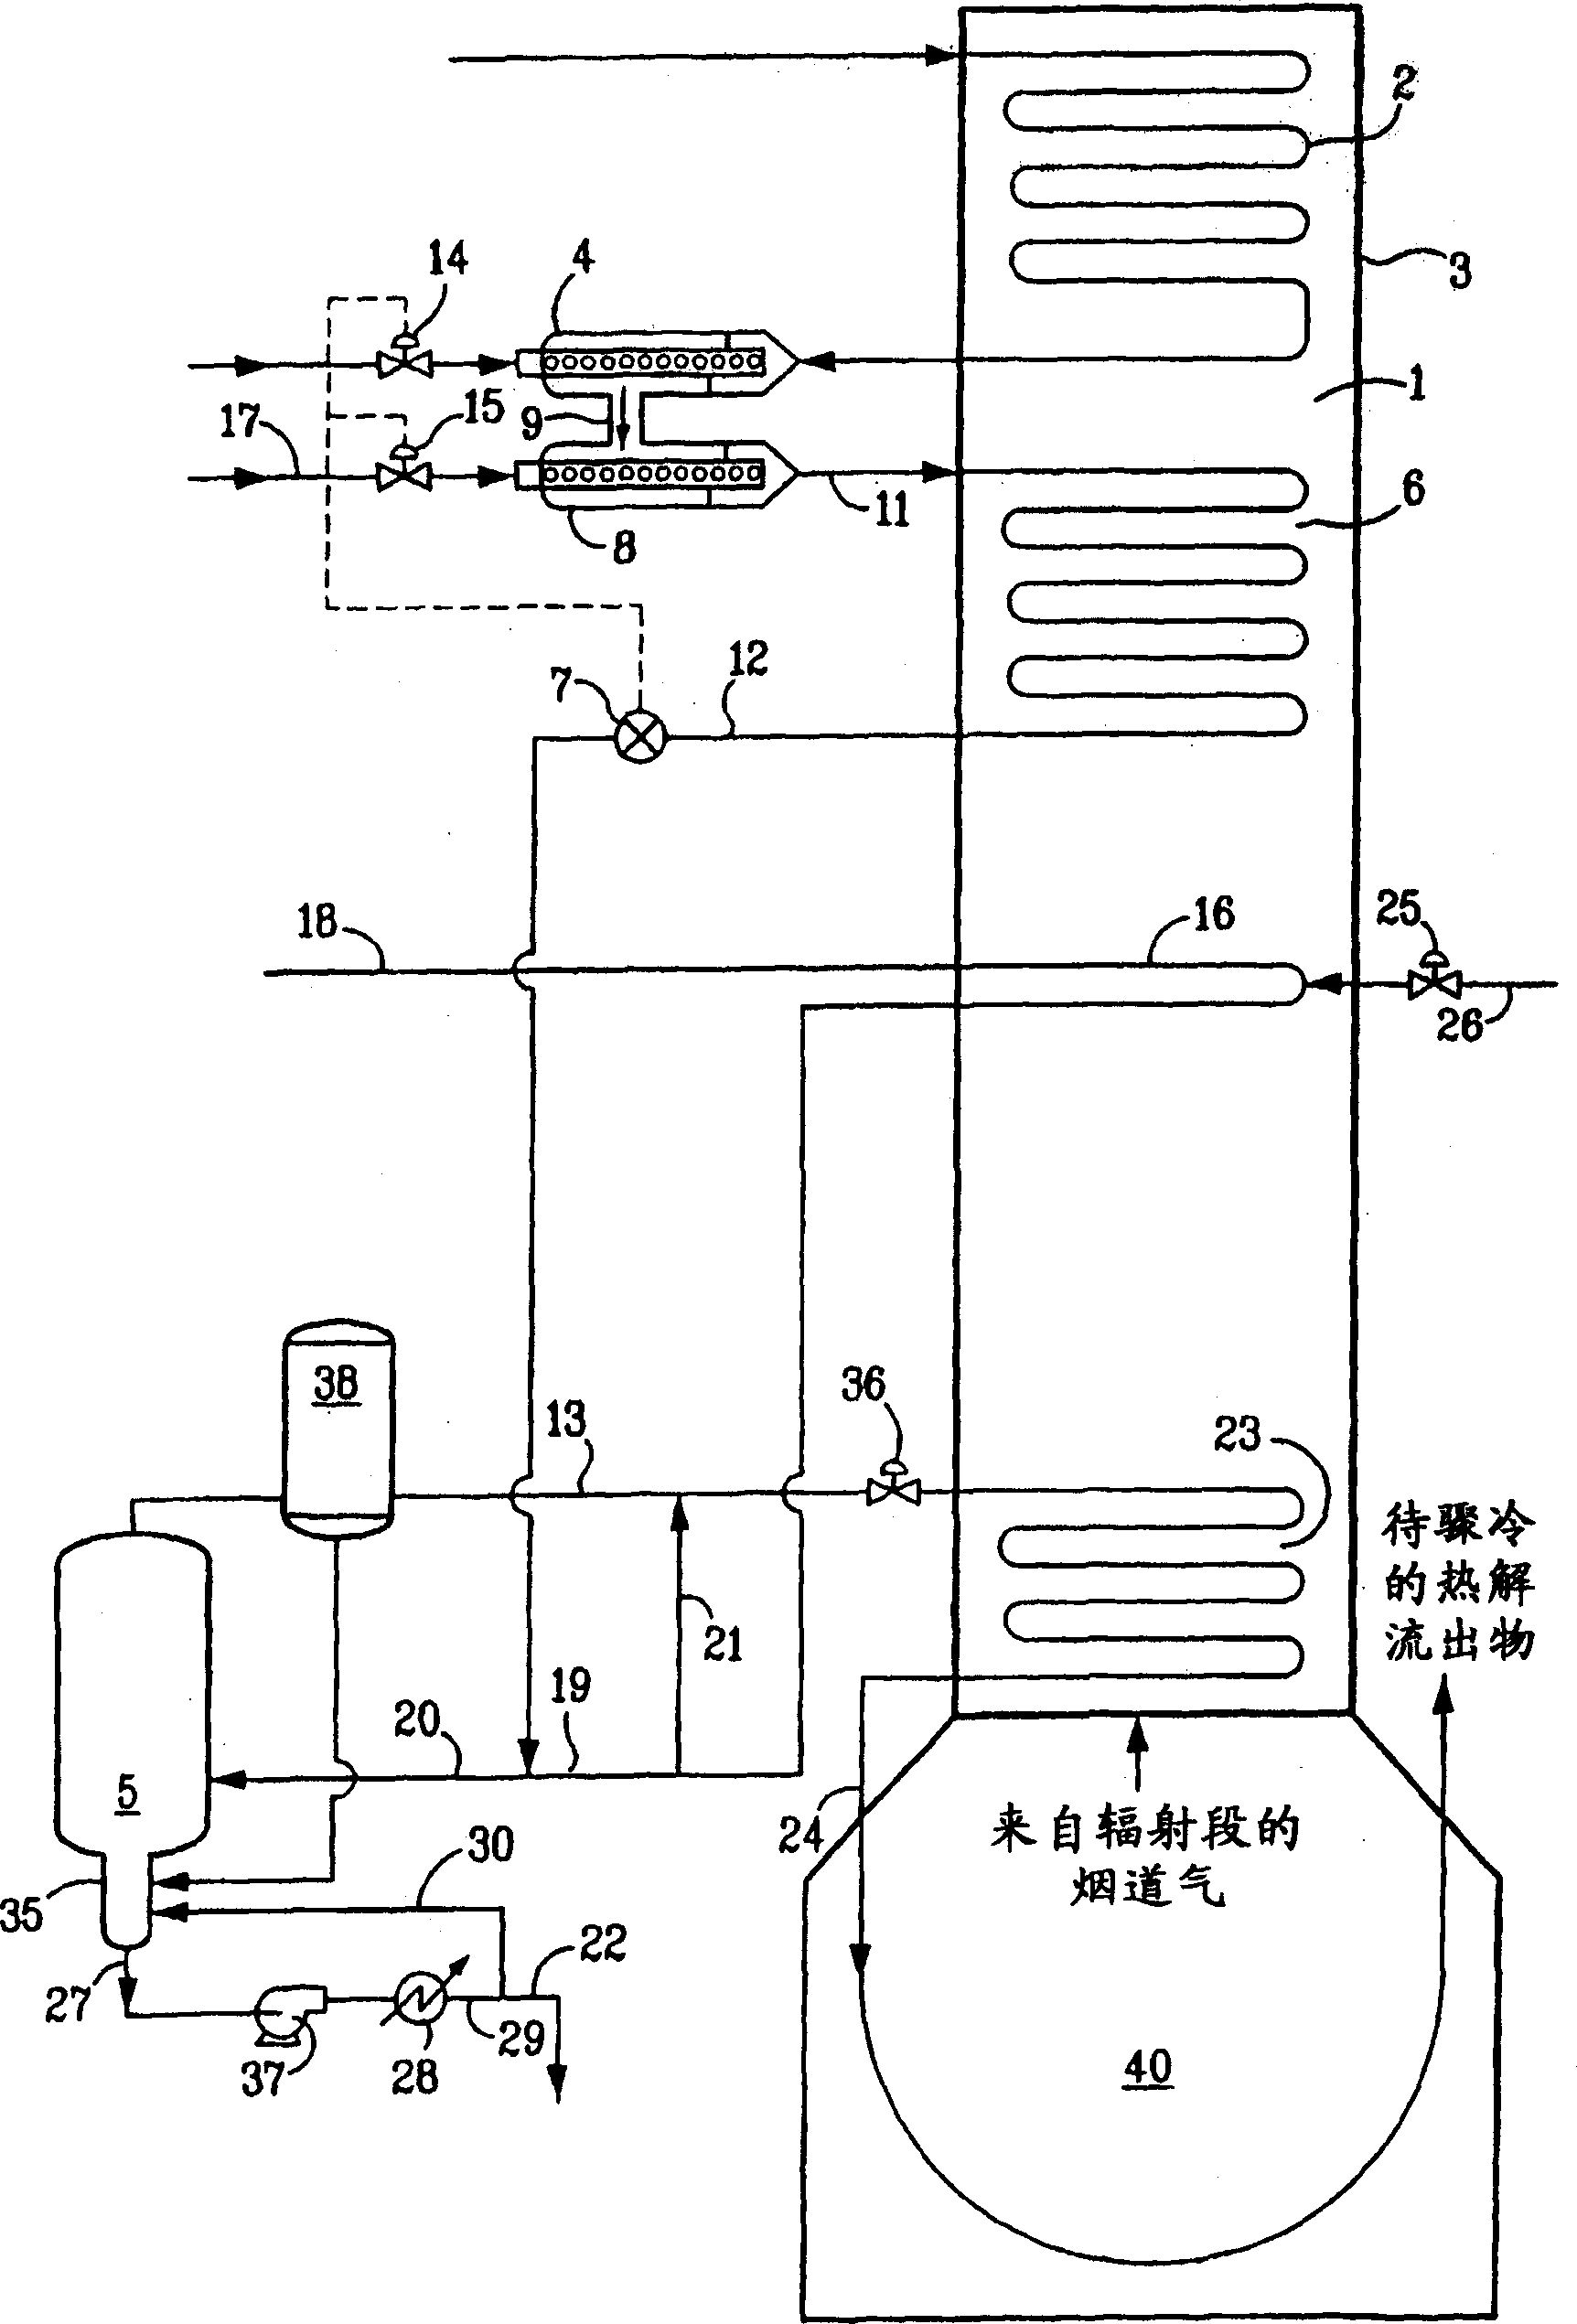 Steam cracking of hydrocarbon feedstocks containing salt and/or particulate matter